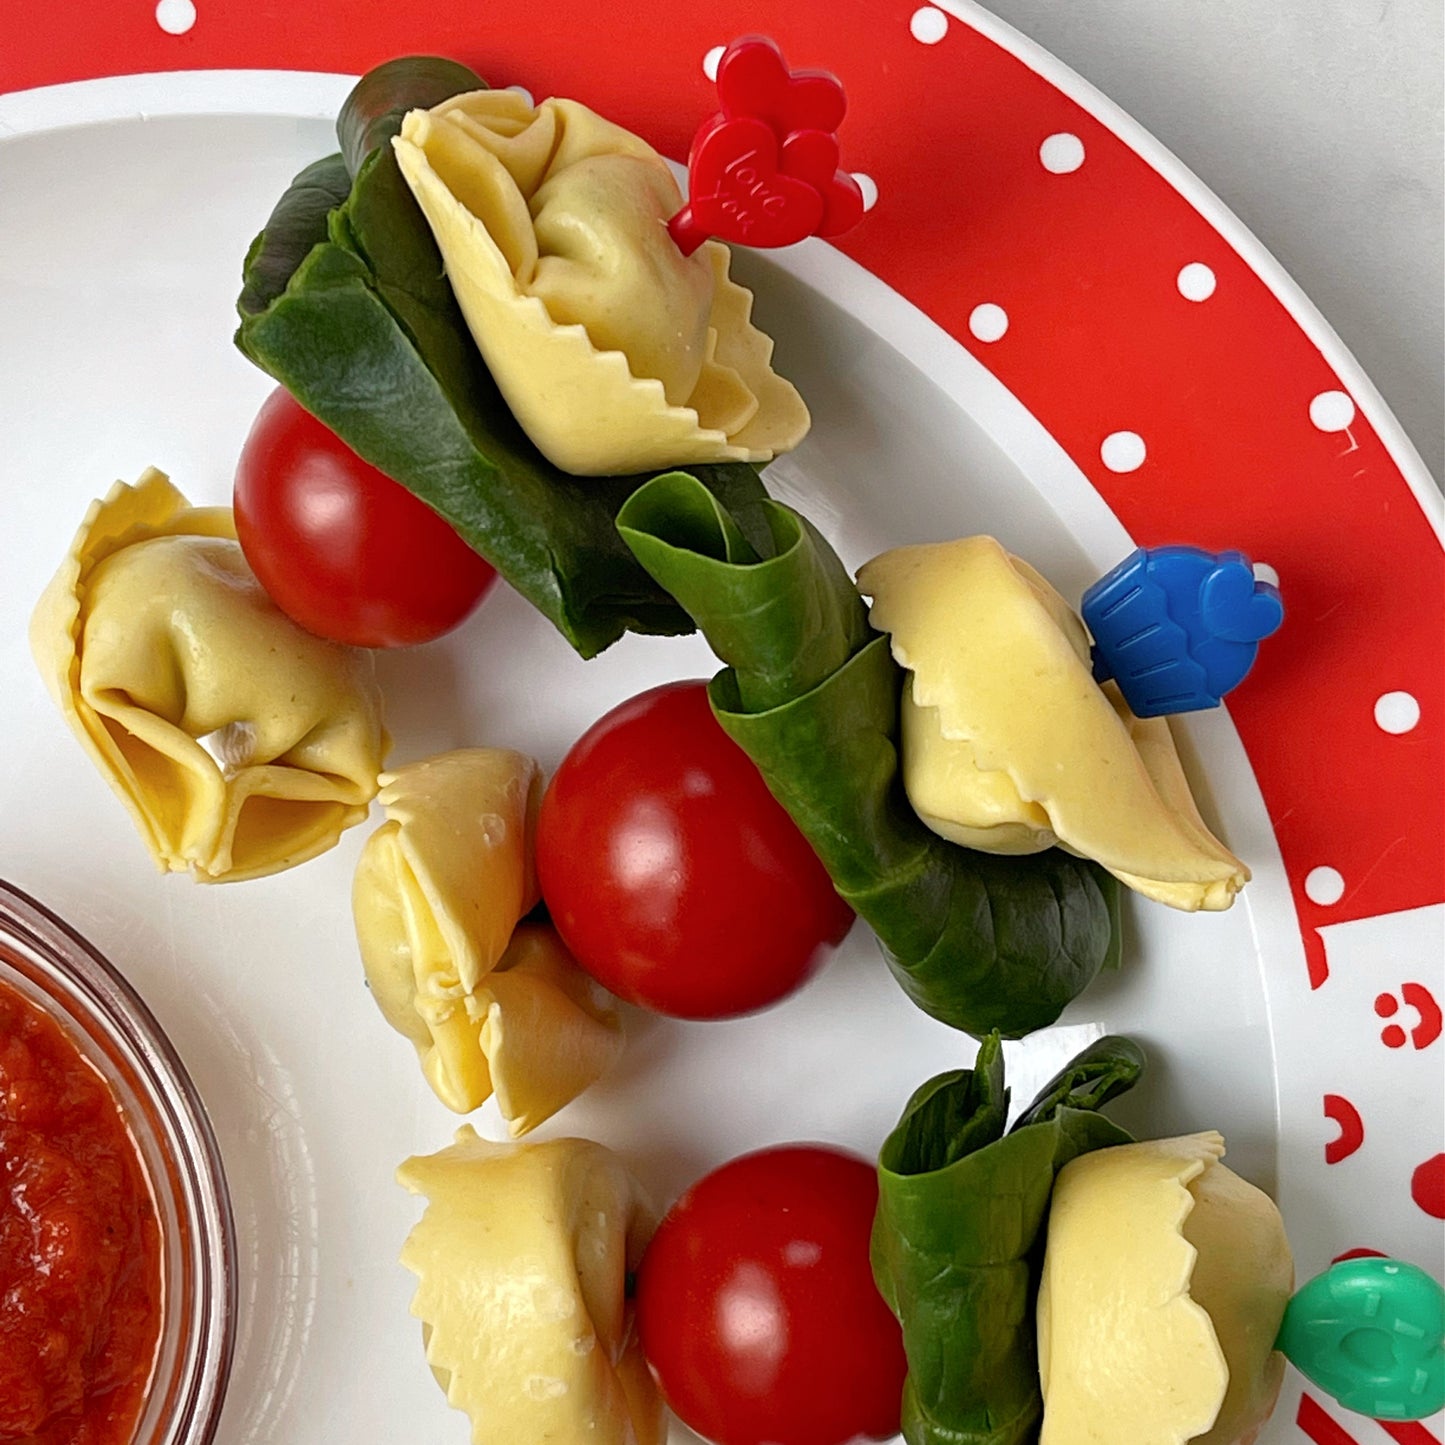 A Red, blue and Green Pick stick with tortelloni, cherry tomato and basil leaves on each of the skewers.